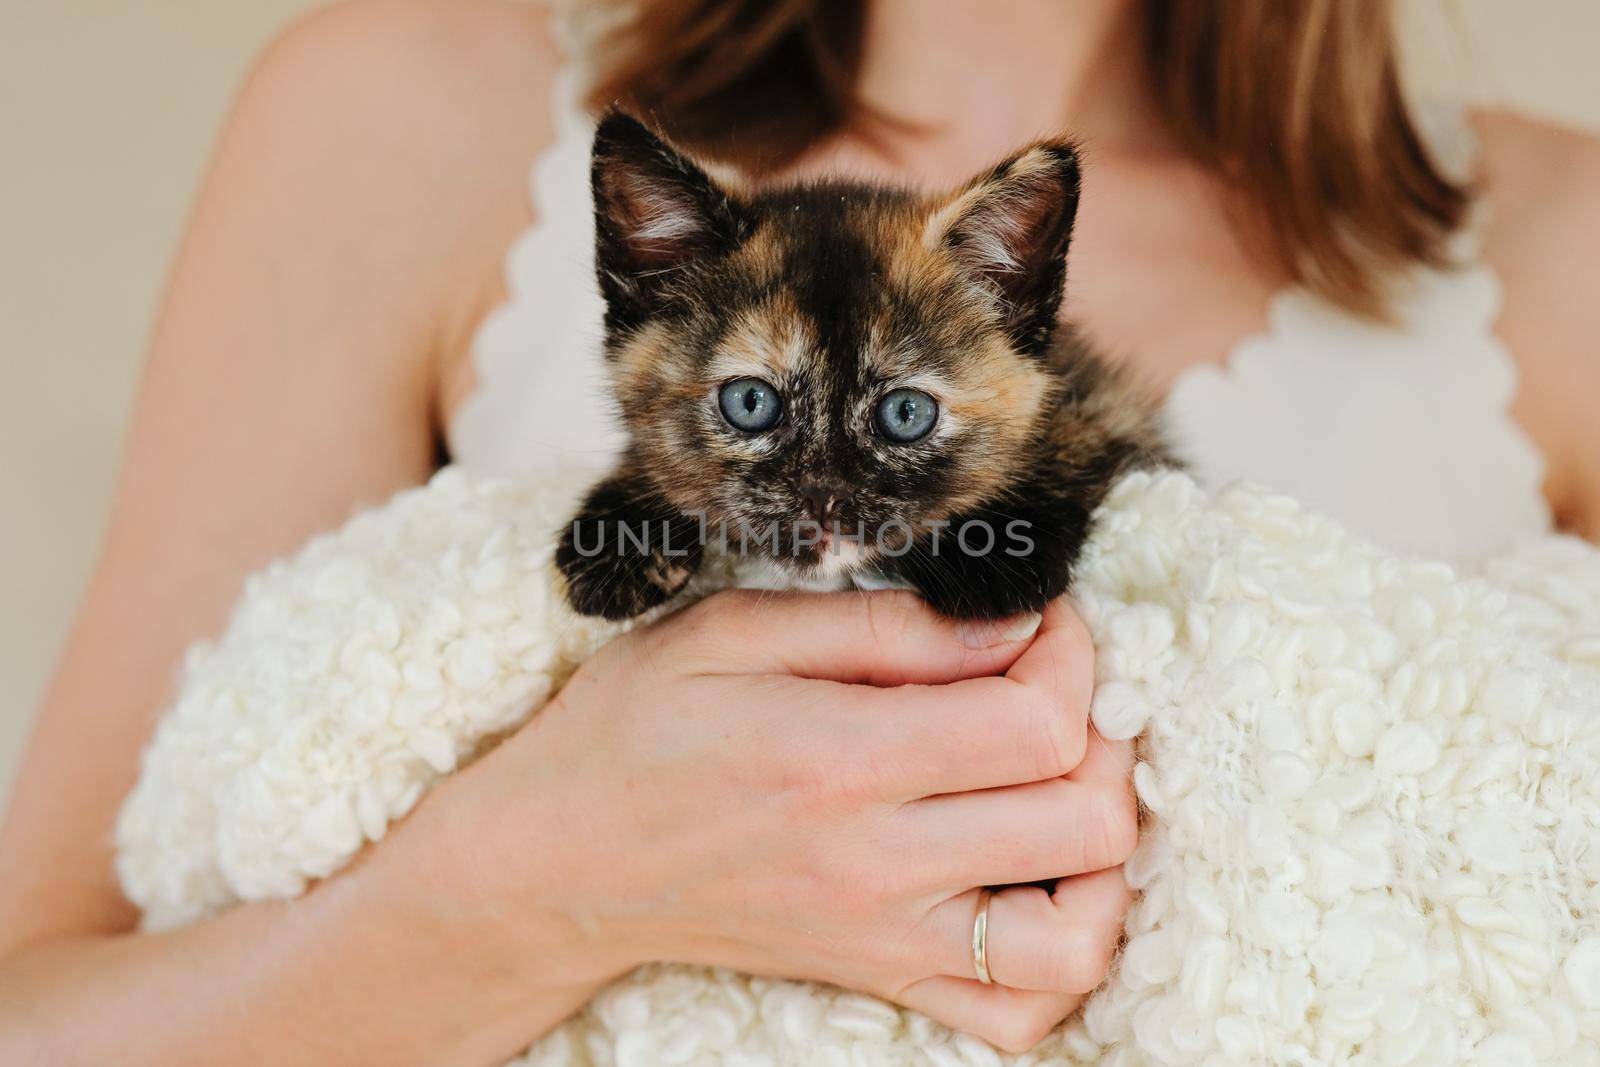 Woman holding little curious red striped kitten in hand over white blanket looking at camera